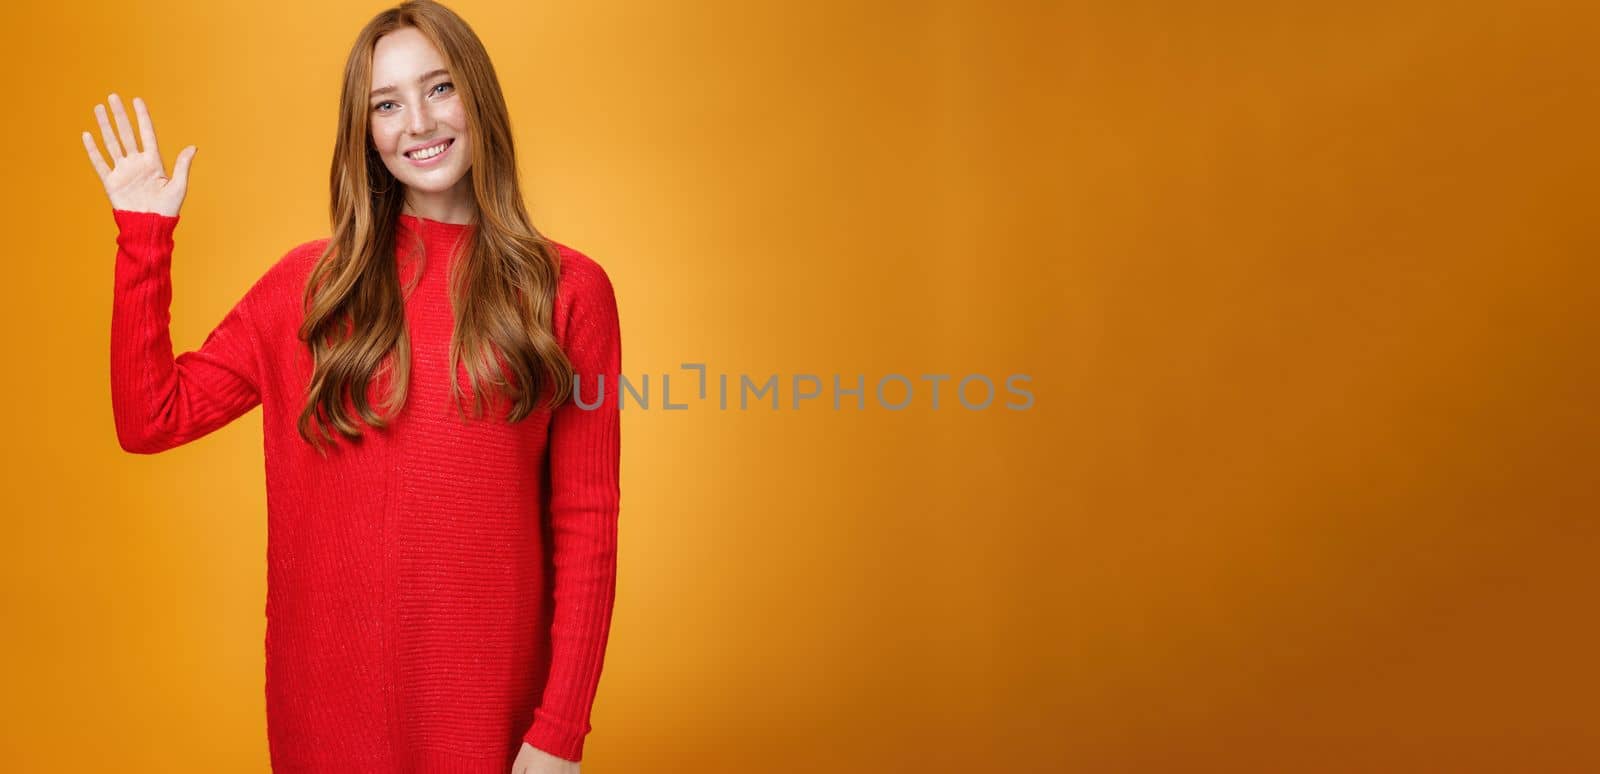 Friendly and optimistic good-looking ginger girl in red sweater raising palm waving at camera, saying hello or hi joyfully smiling cute, greeting new members posing over orange background.